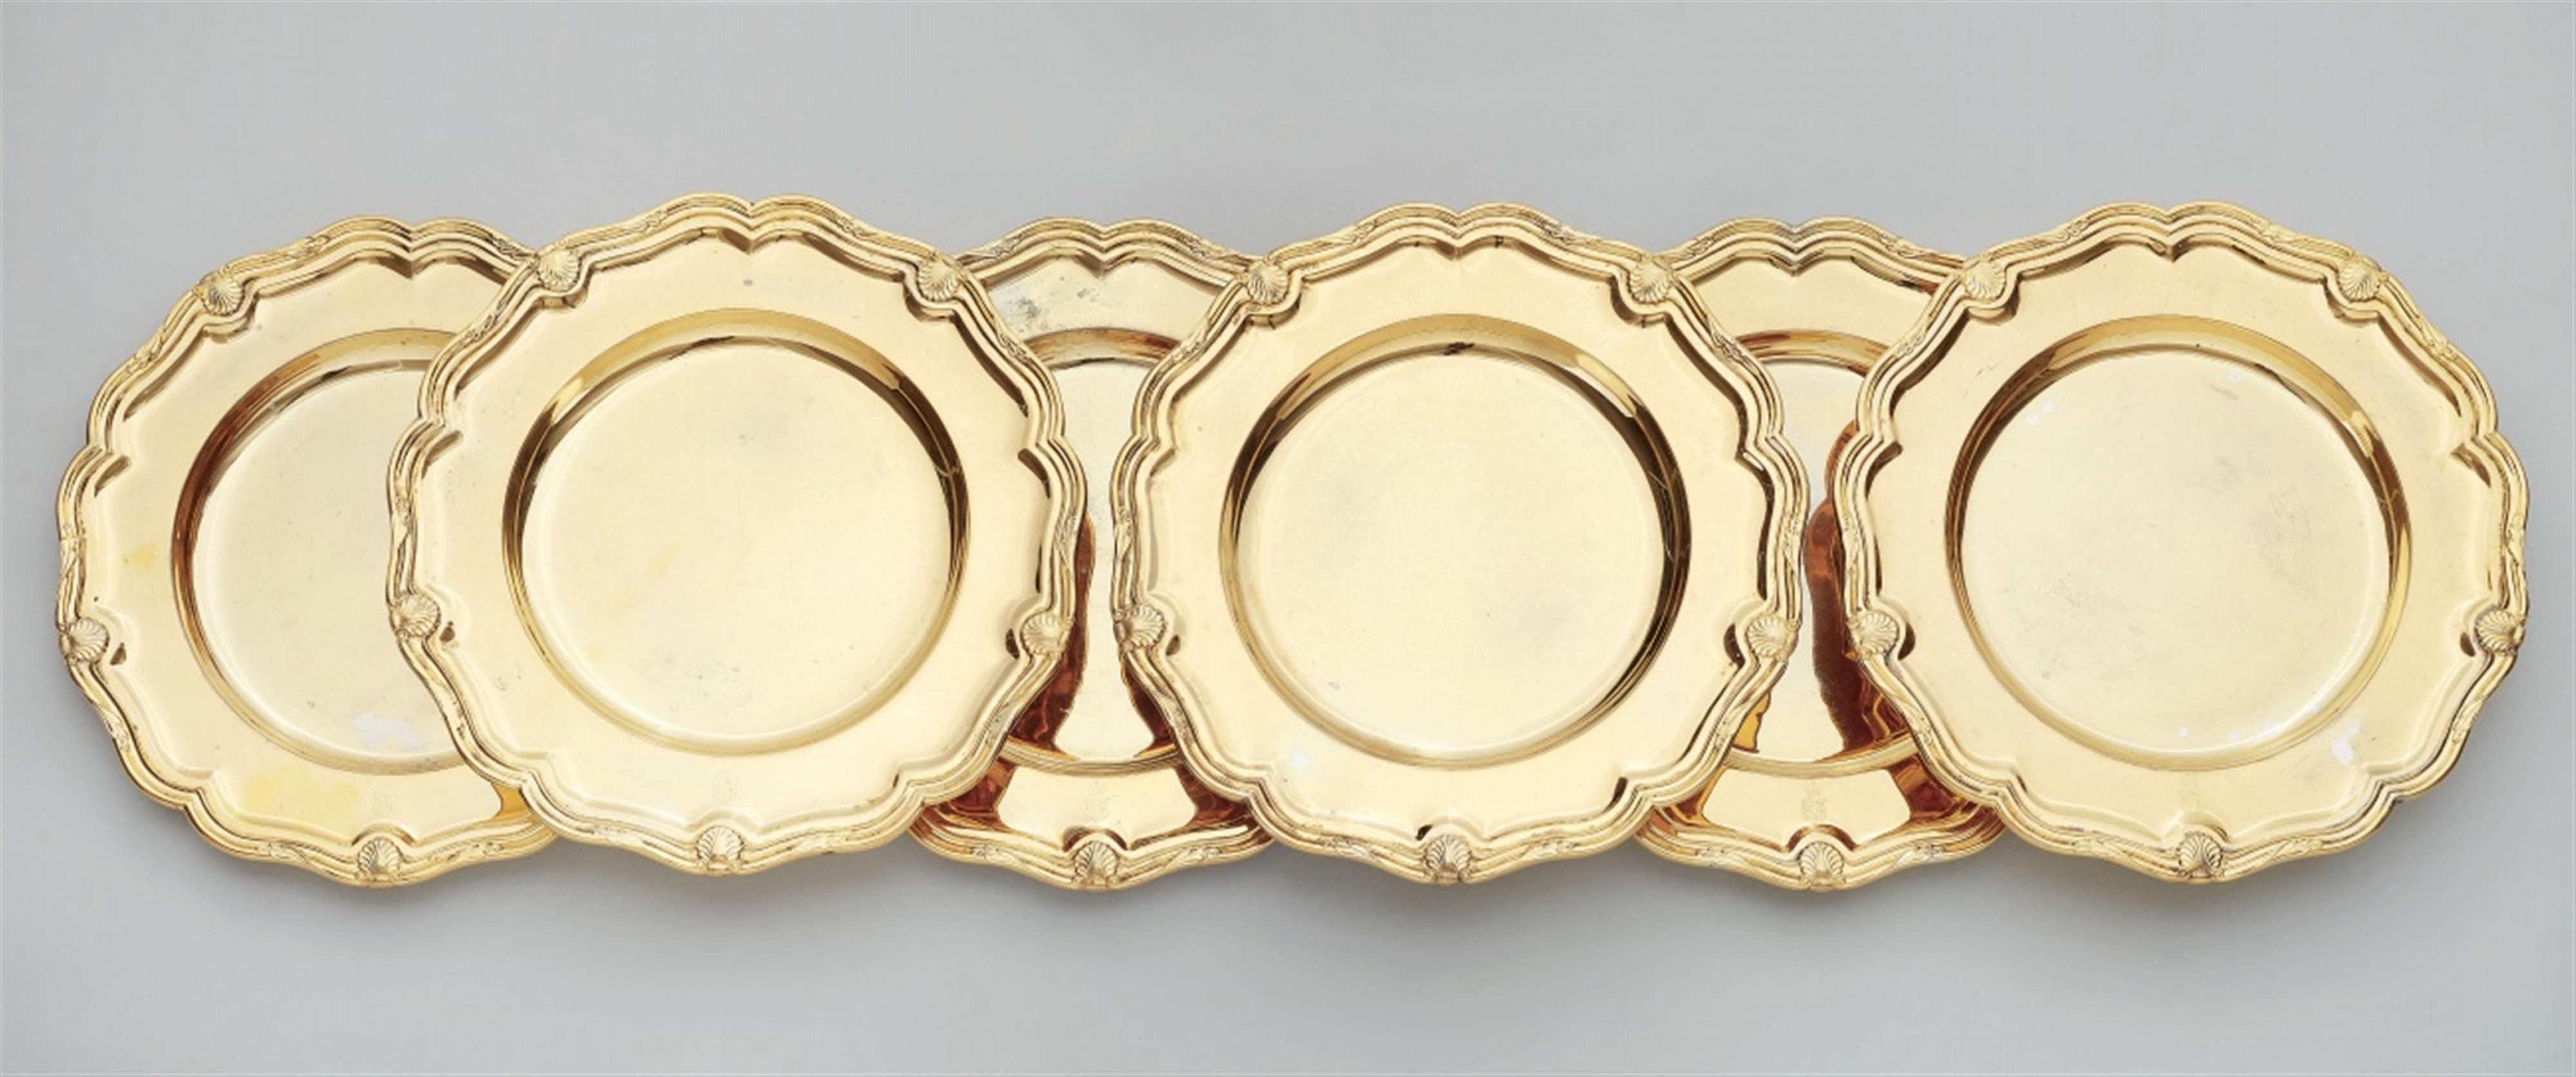 12 Berlin silver gilt plates made for the Grand Dukes of Mecklenburg-Schwerin - image-2